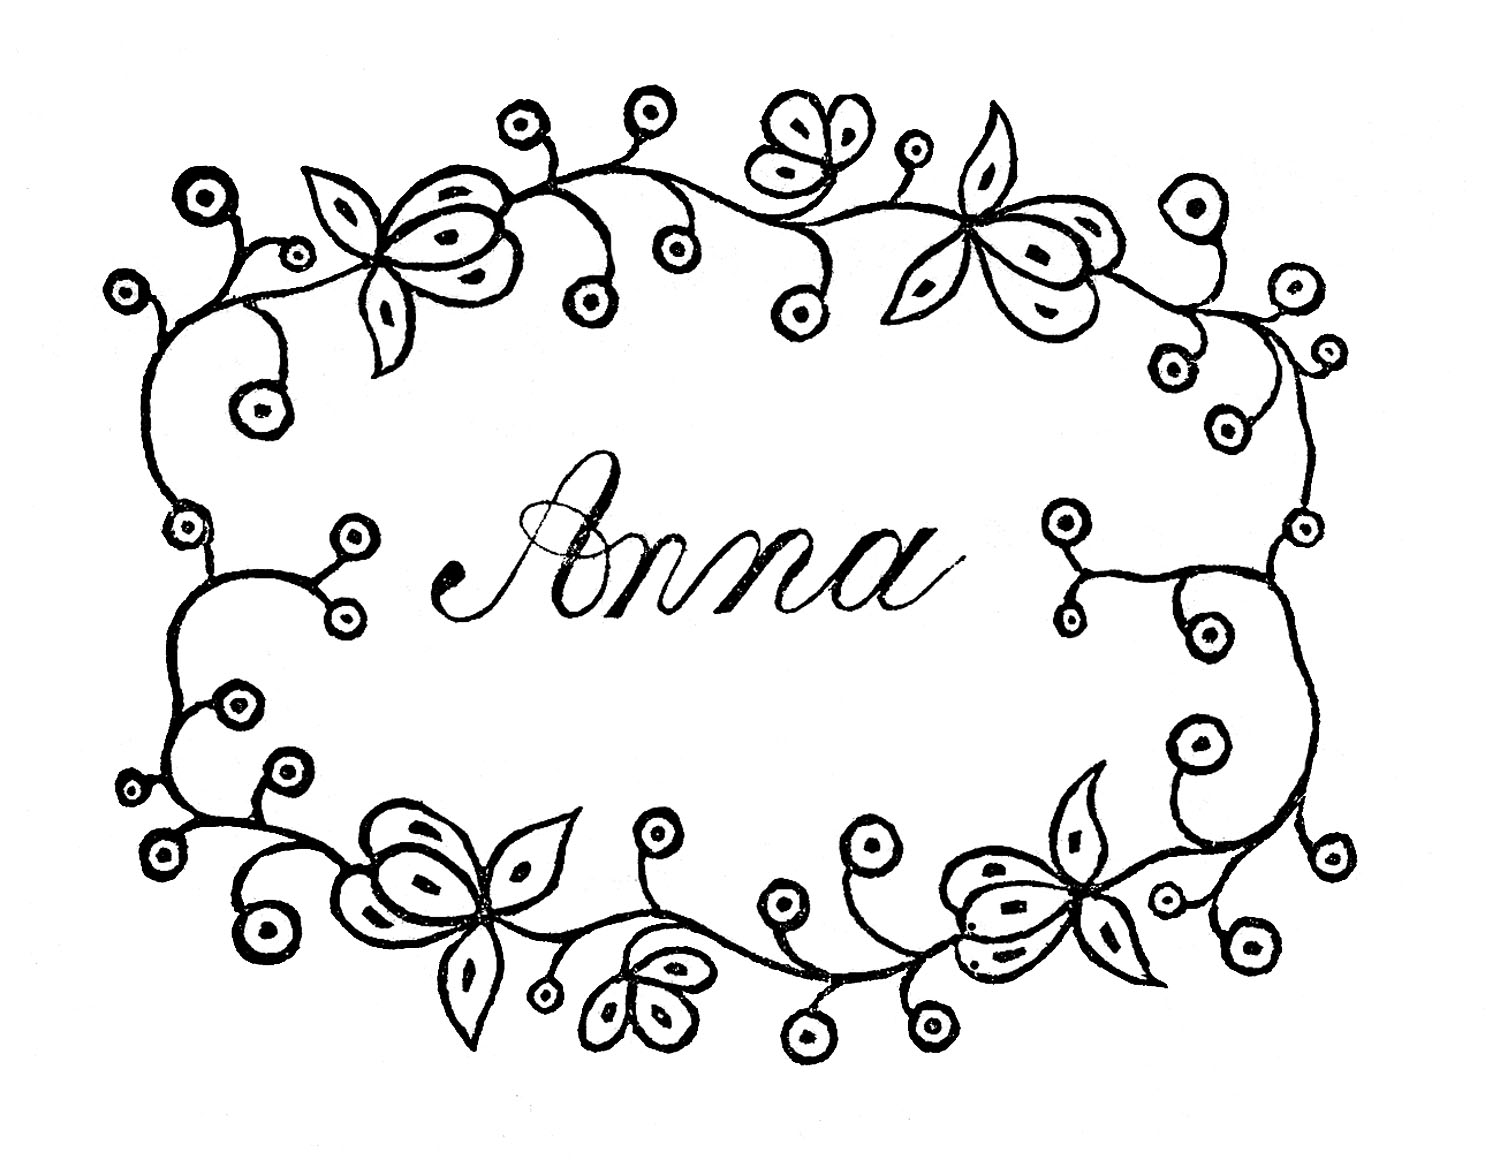 Royalty Free Images - Embroidery Patterns - Floral Frames - The ...